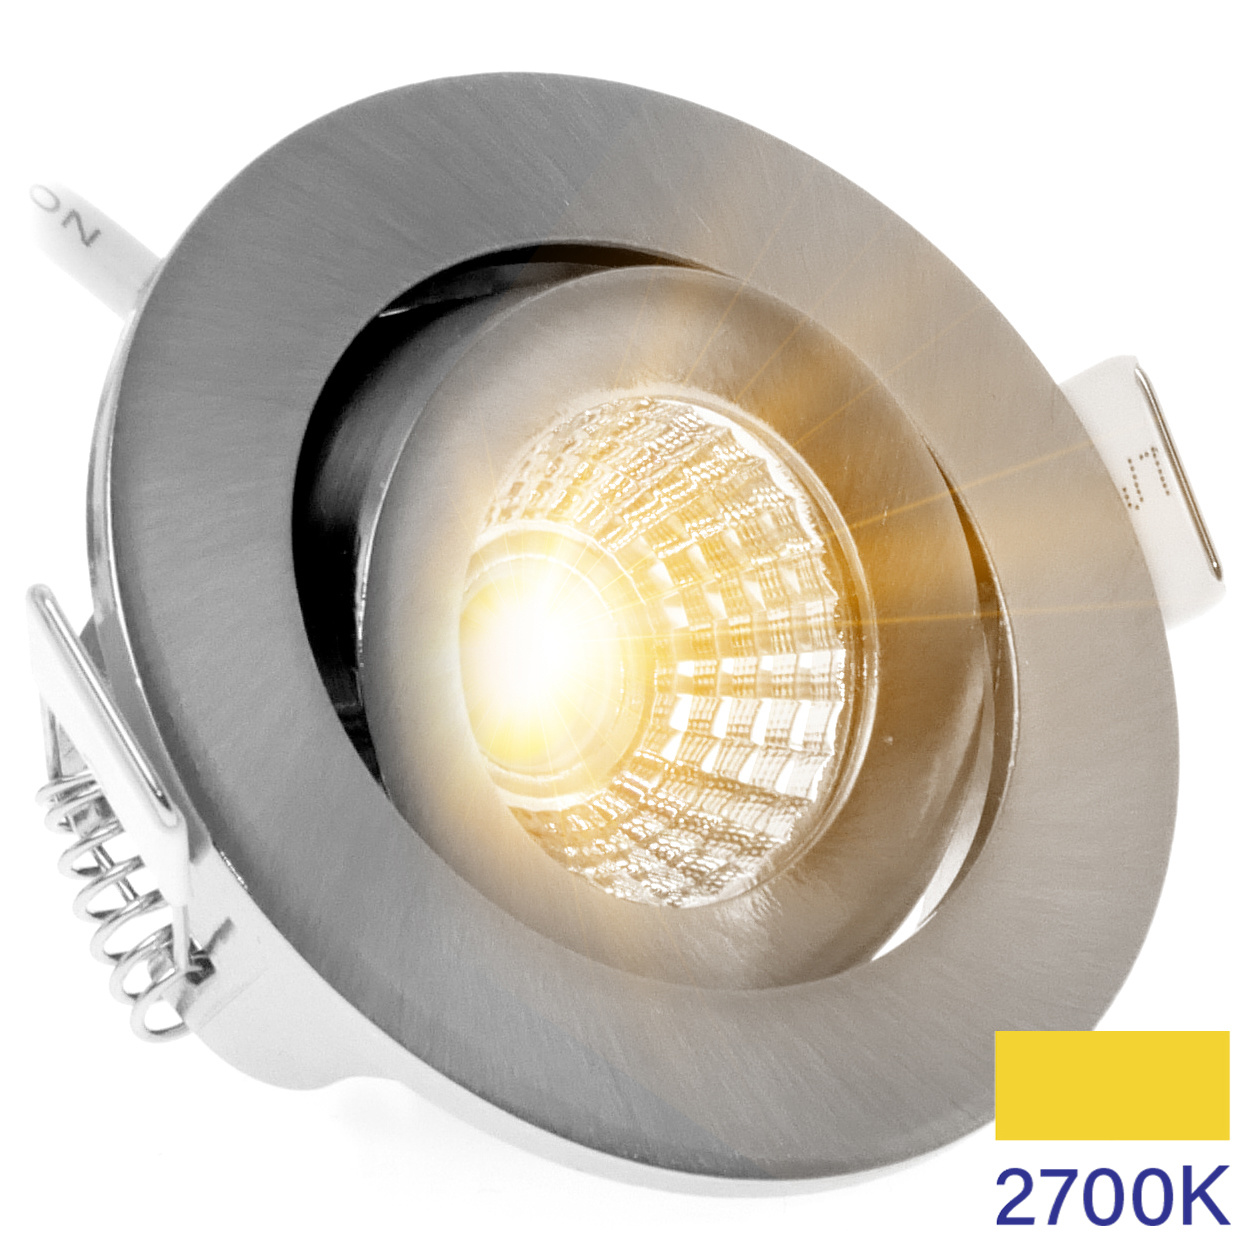 ED-10063 Led recessed spotlight small recessed depth IP54 warm white, round, brushed nickel, 55mm